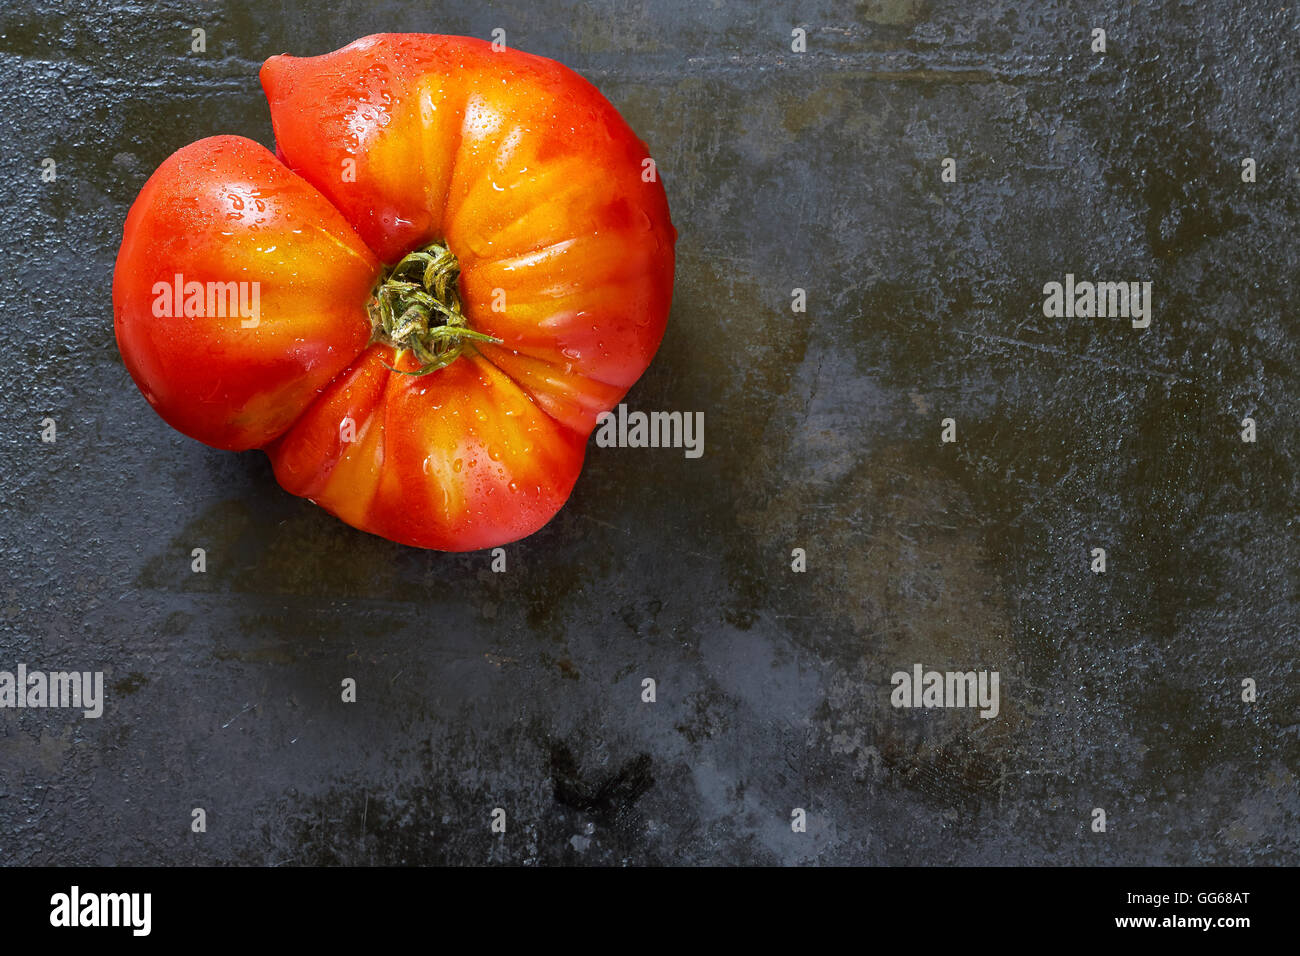 Imperfect organic tomato on black rustic metallic background. Top view with plenty of copy space Stock Photo